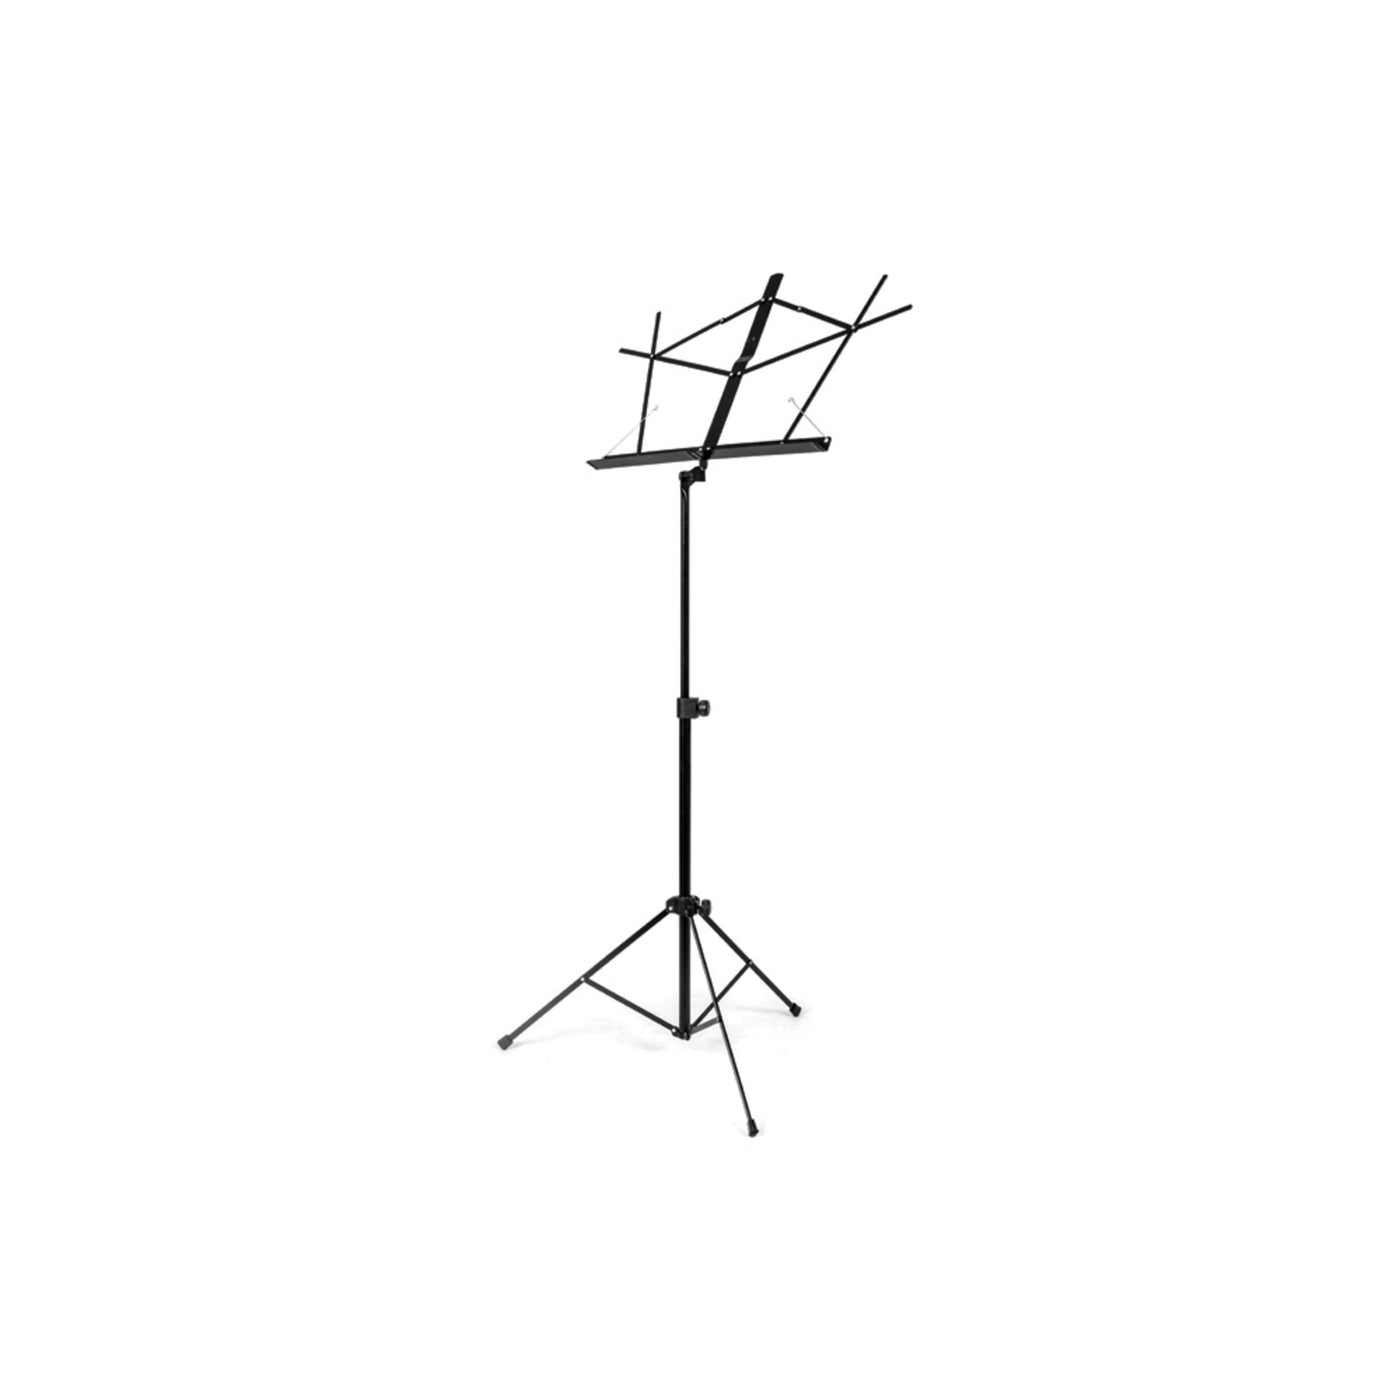 Nomad Lightweight Music Stand with EZ Angle Desk and Bag (NBS-1107)